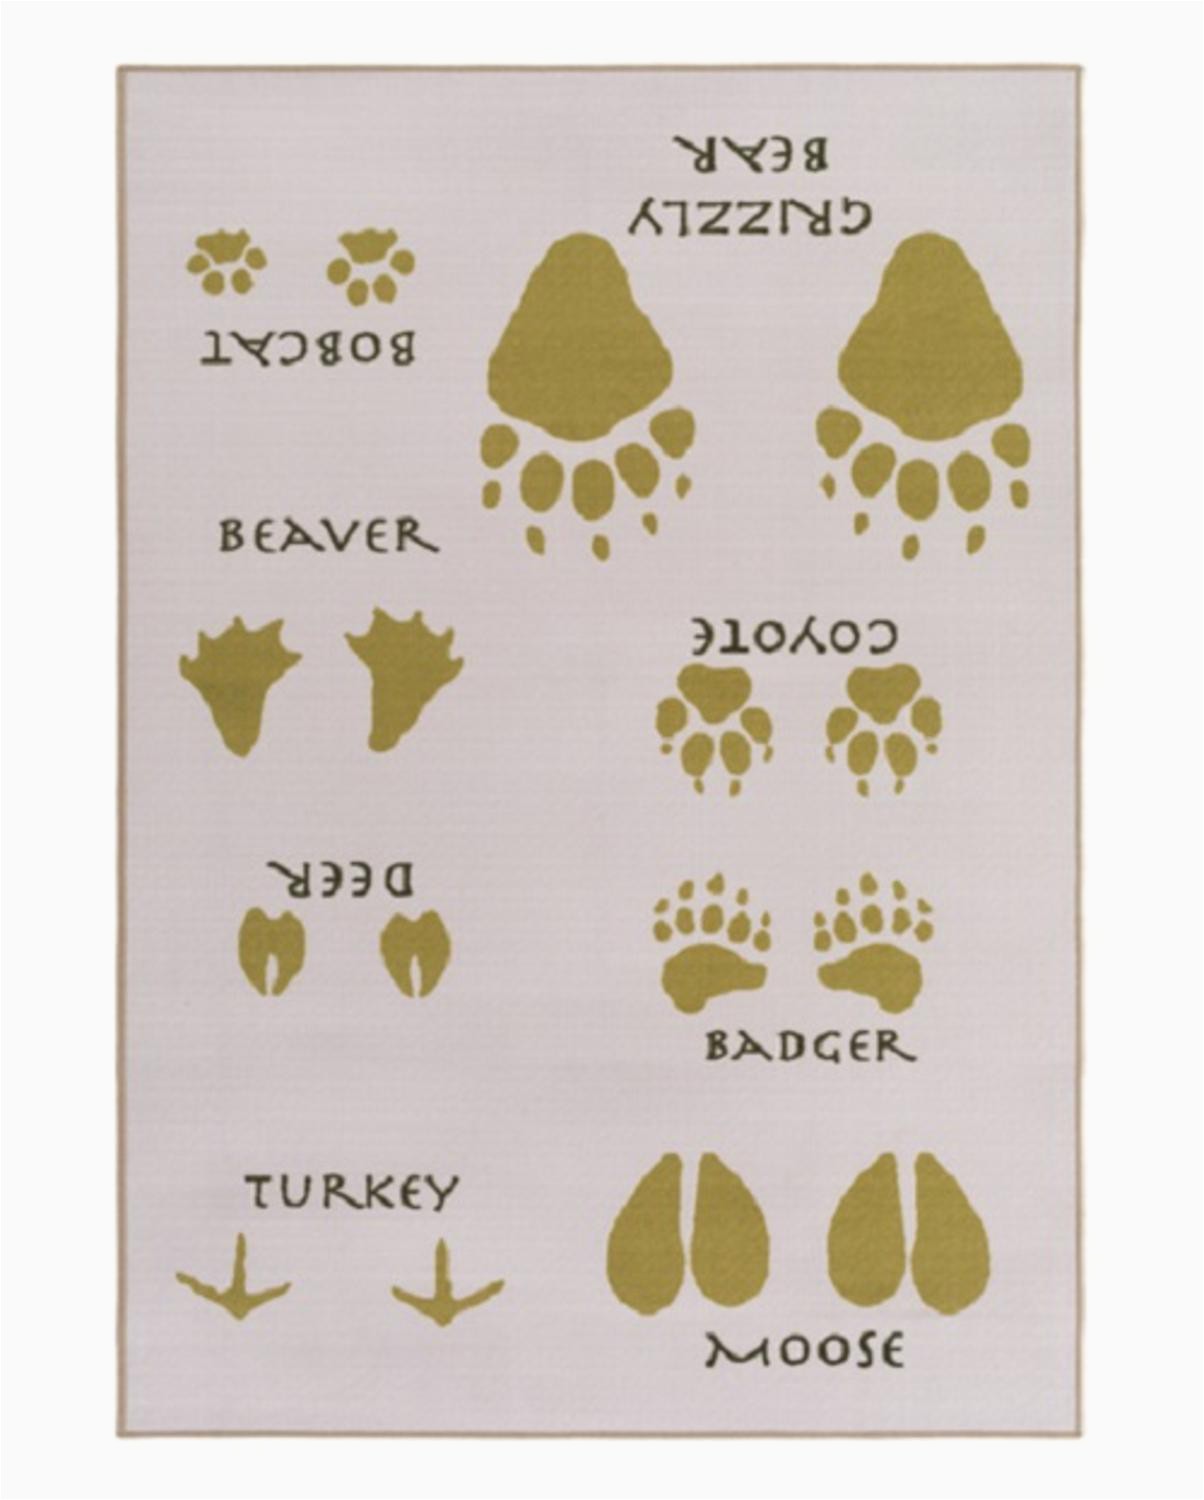 Dog Paw Print area Rugs 5 X 8 Authentic Mossy Oak Gray Khaki and Rich Moss Paw